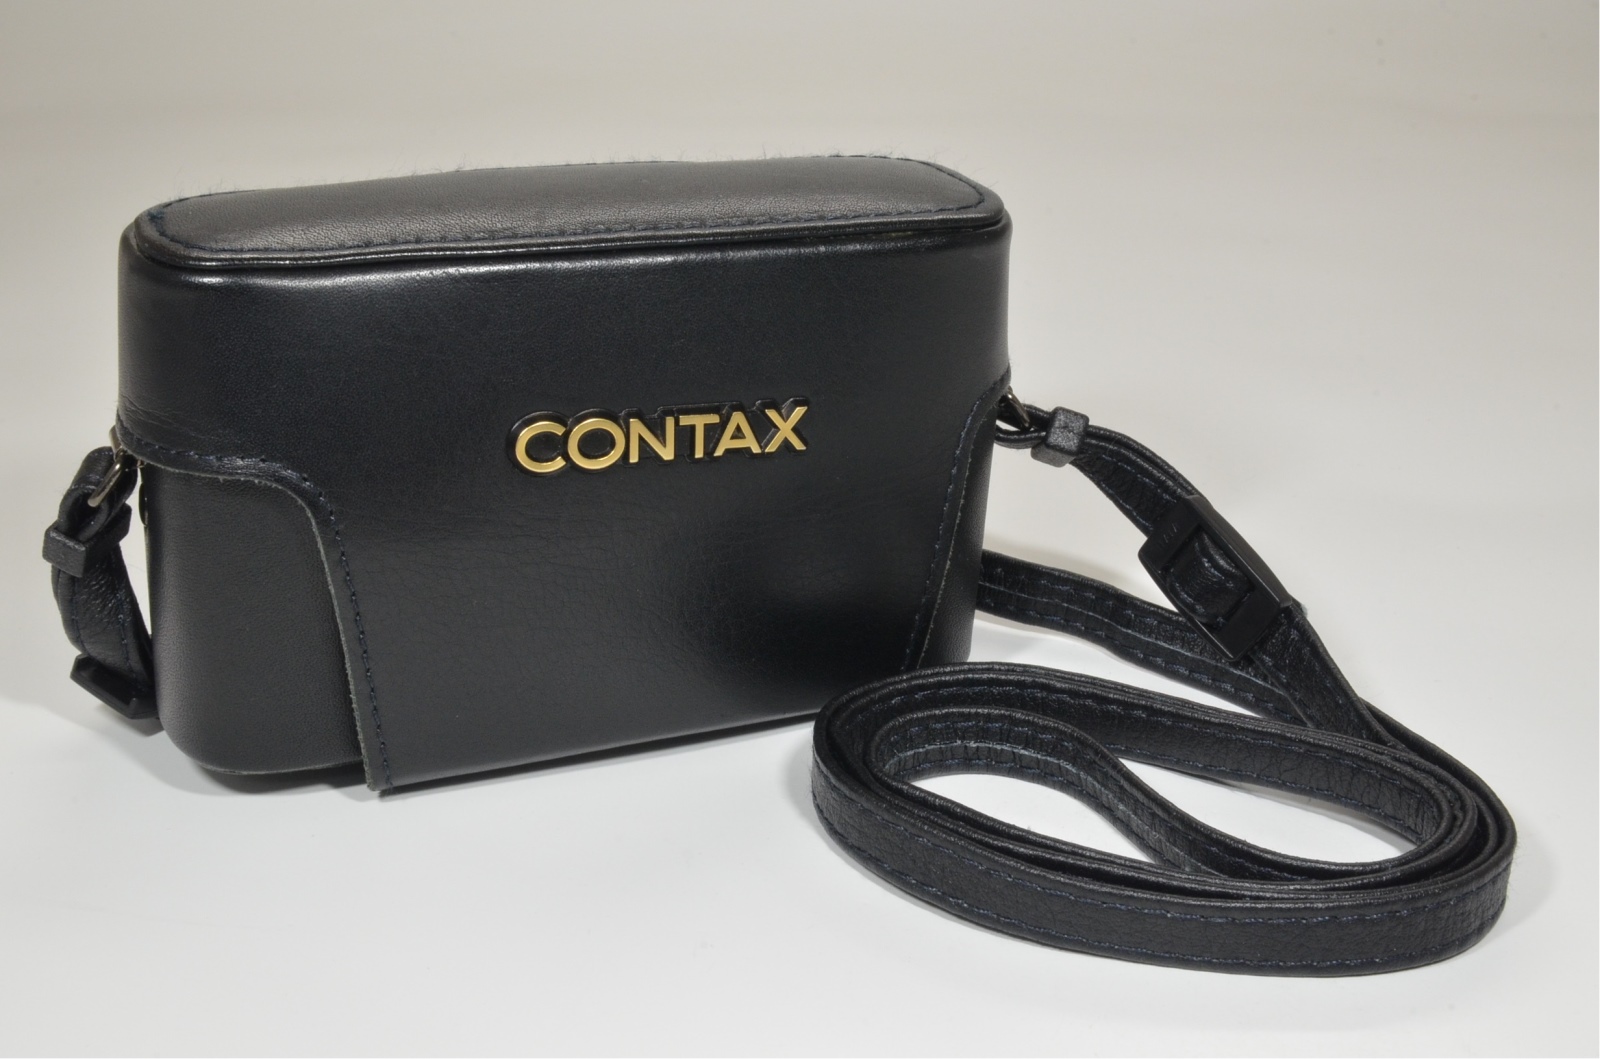 contax t2 black limited p&s 35mm film camera with full leather case